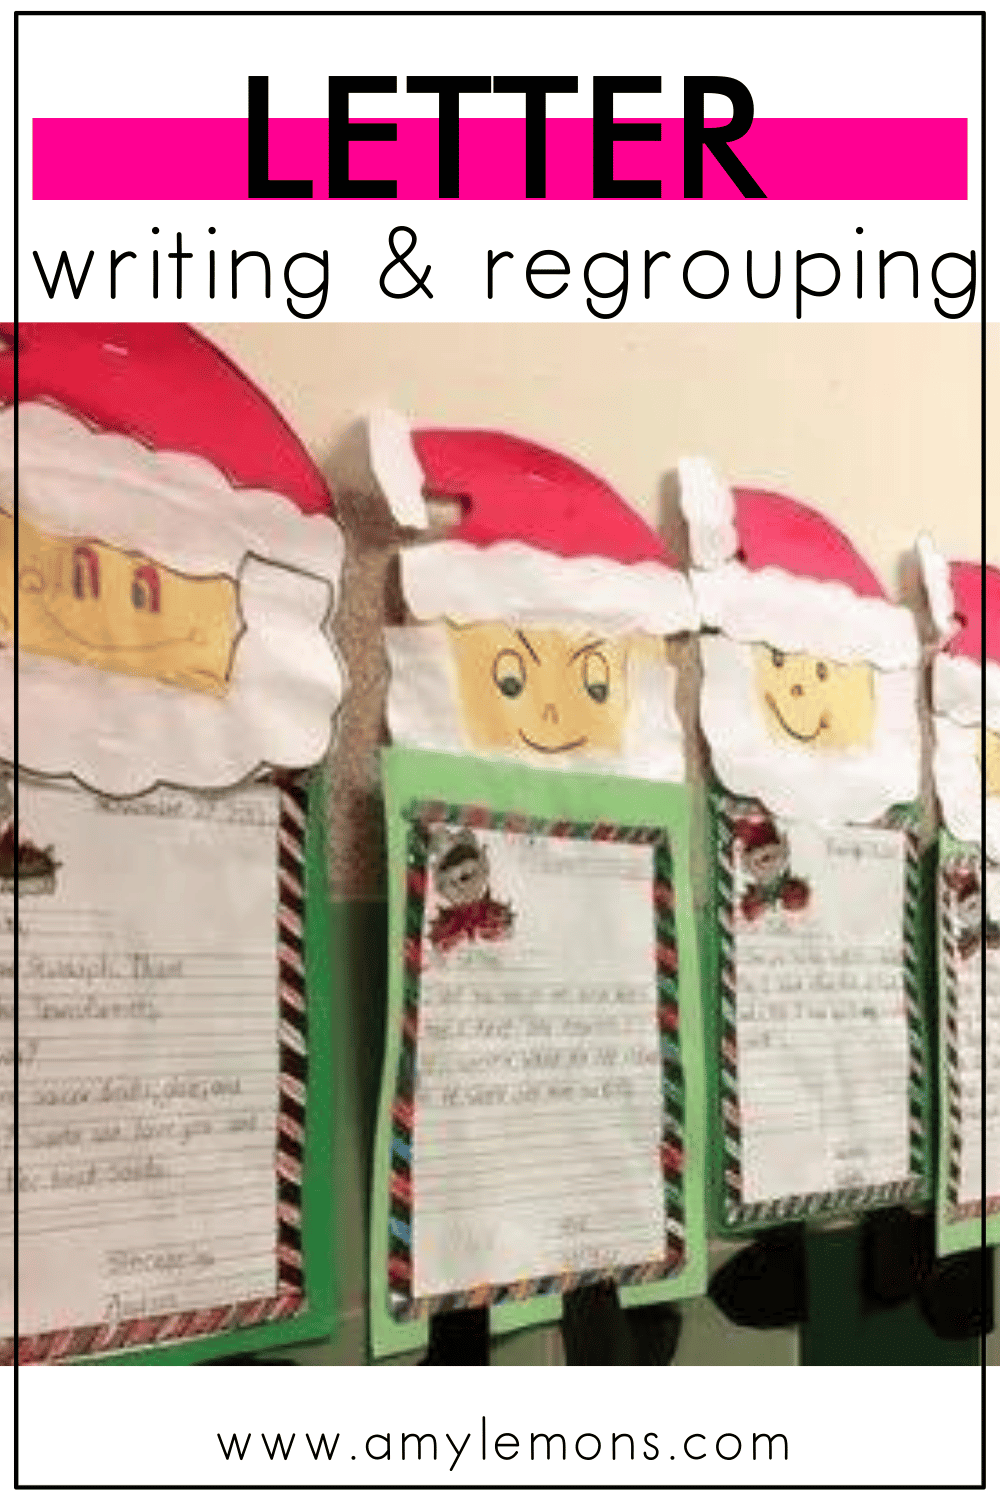 Letter Writing and Regrouping - Amy Lemons